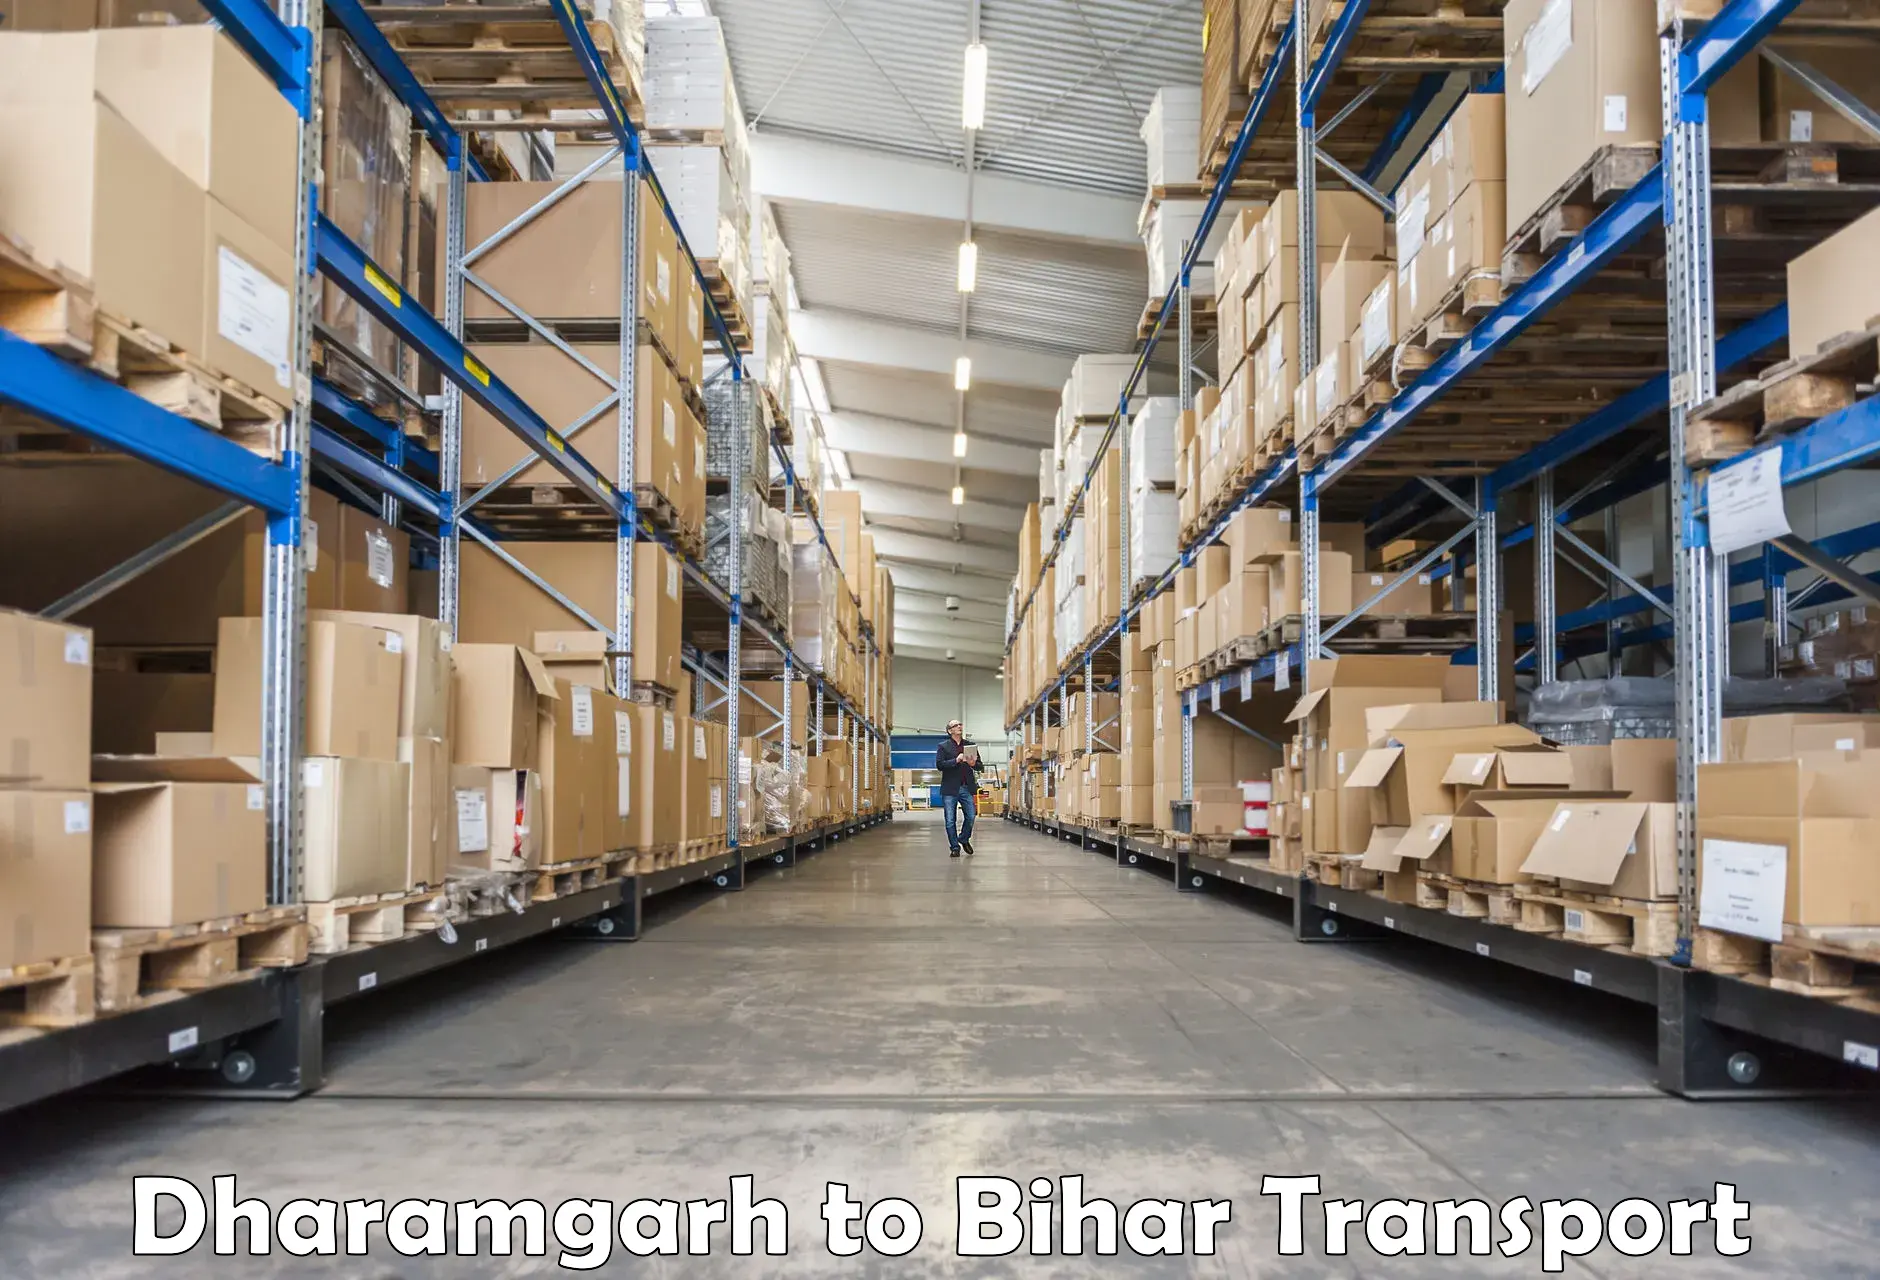 Truck transport companies in India Dharamgarh to Dehri